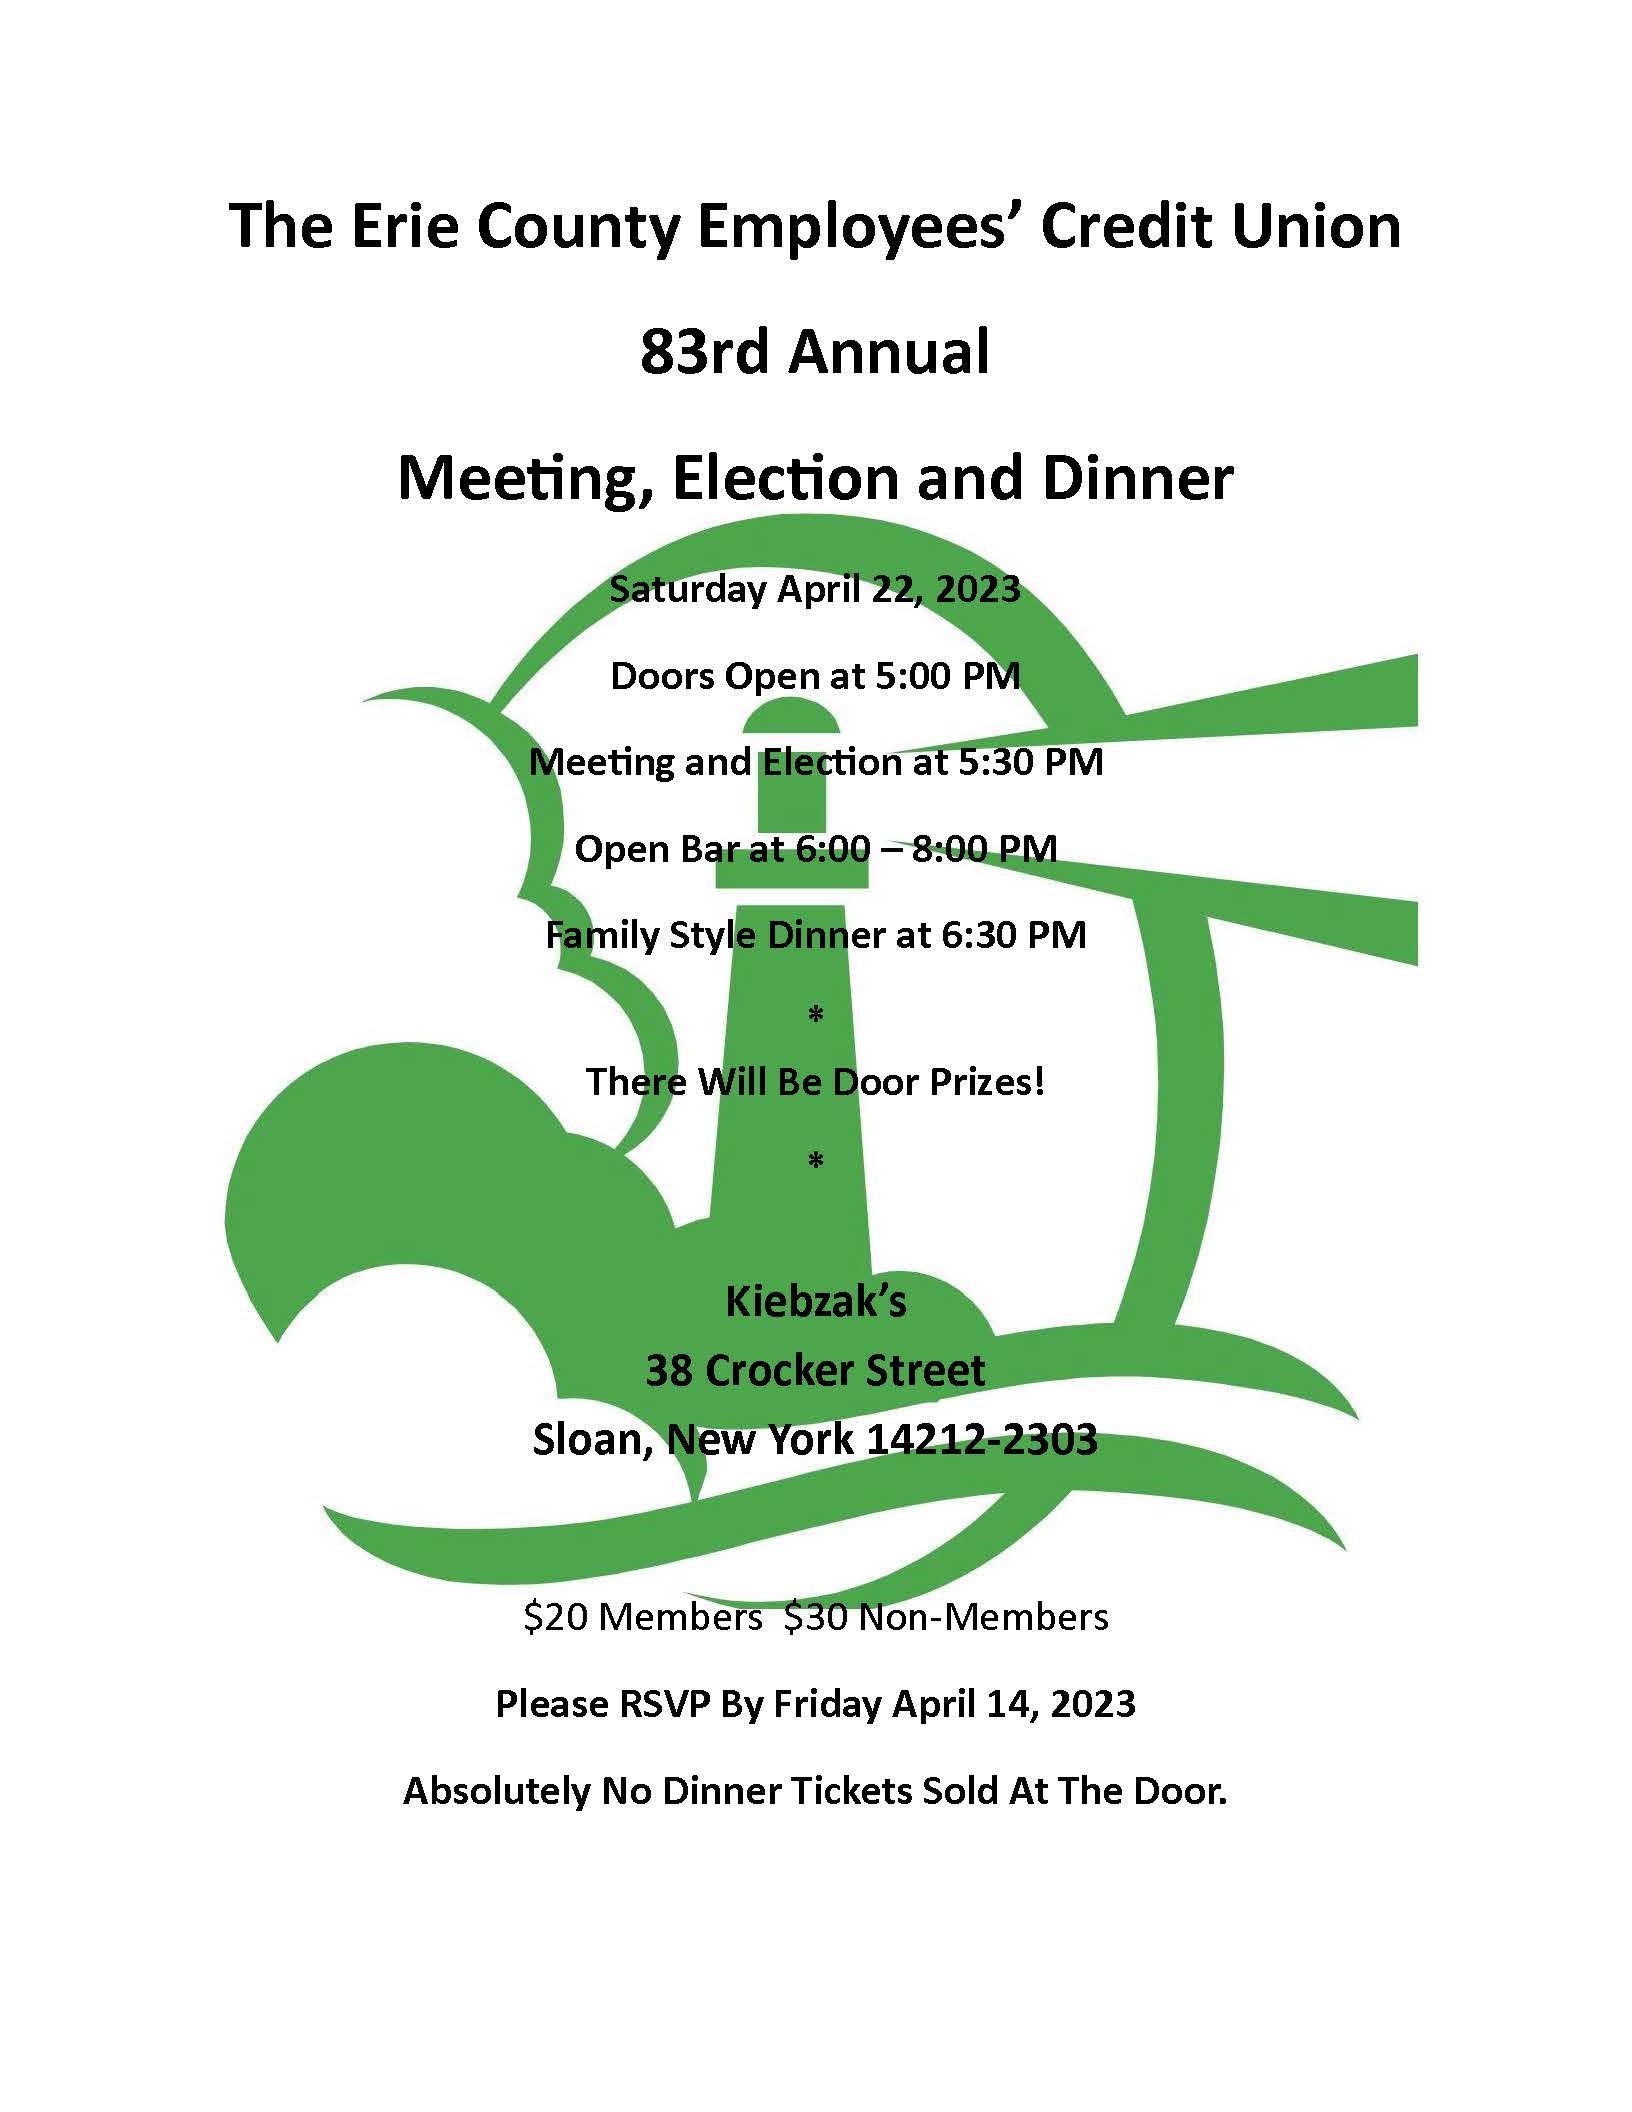 23 annual meeting flyer